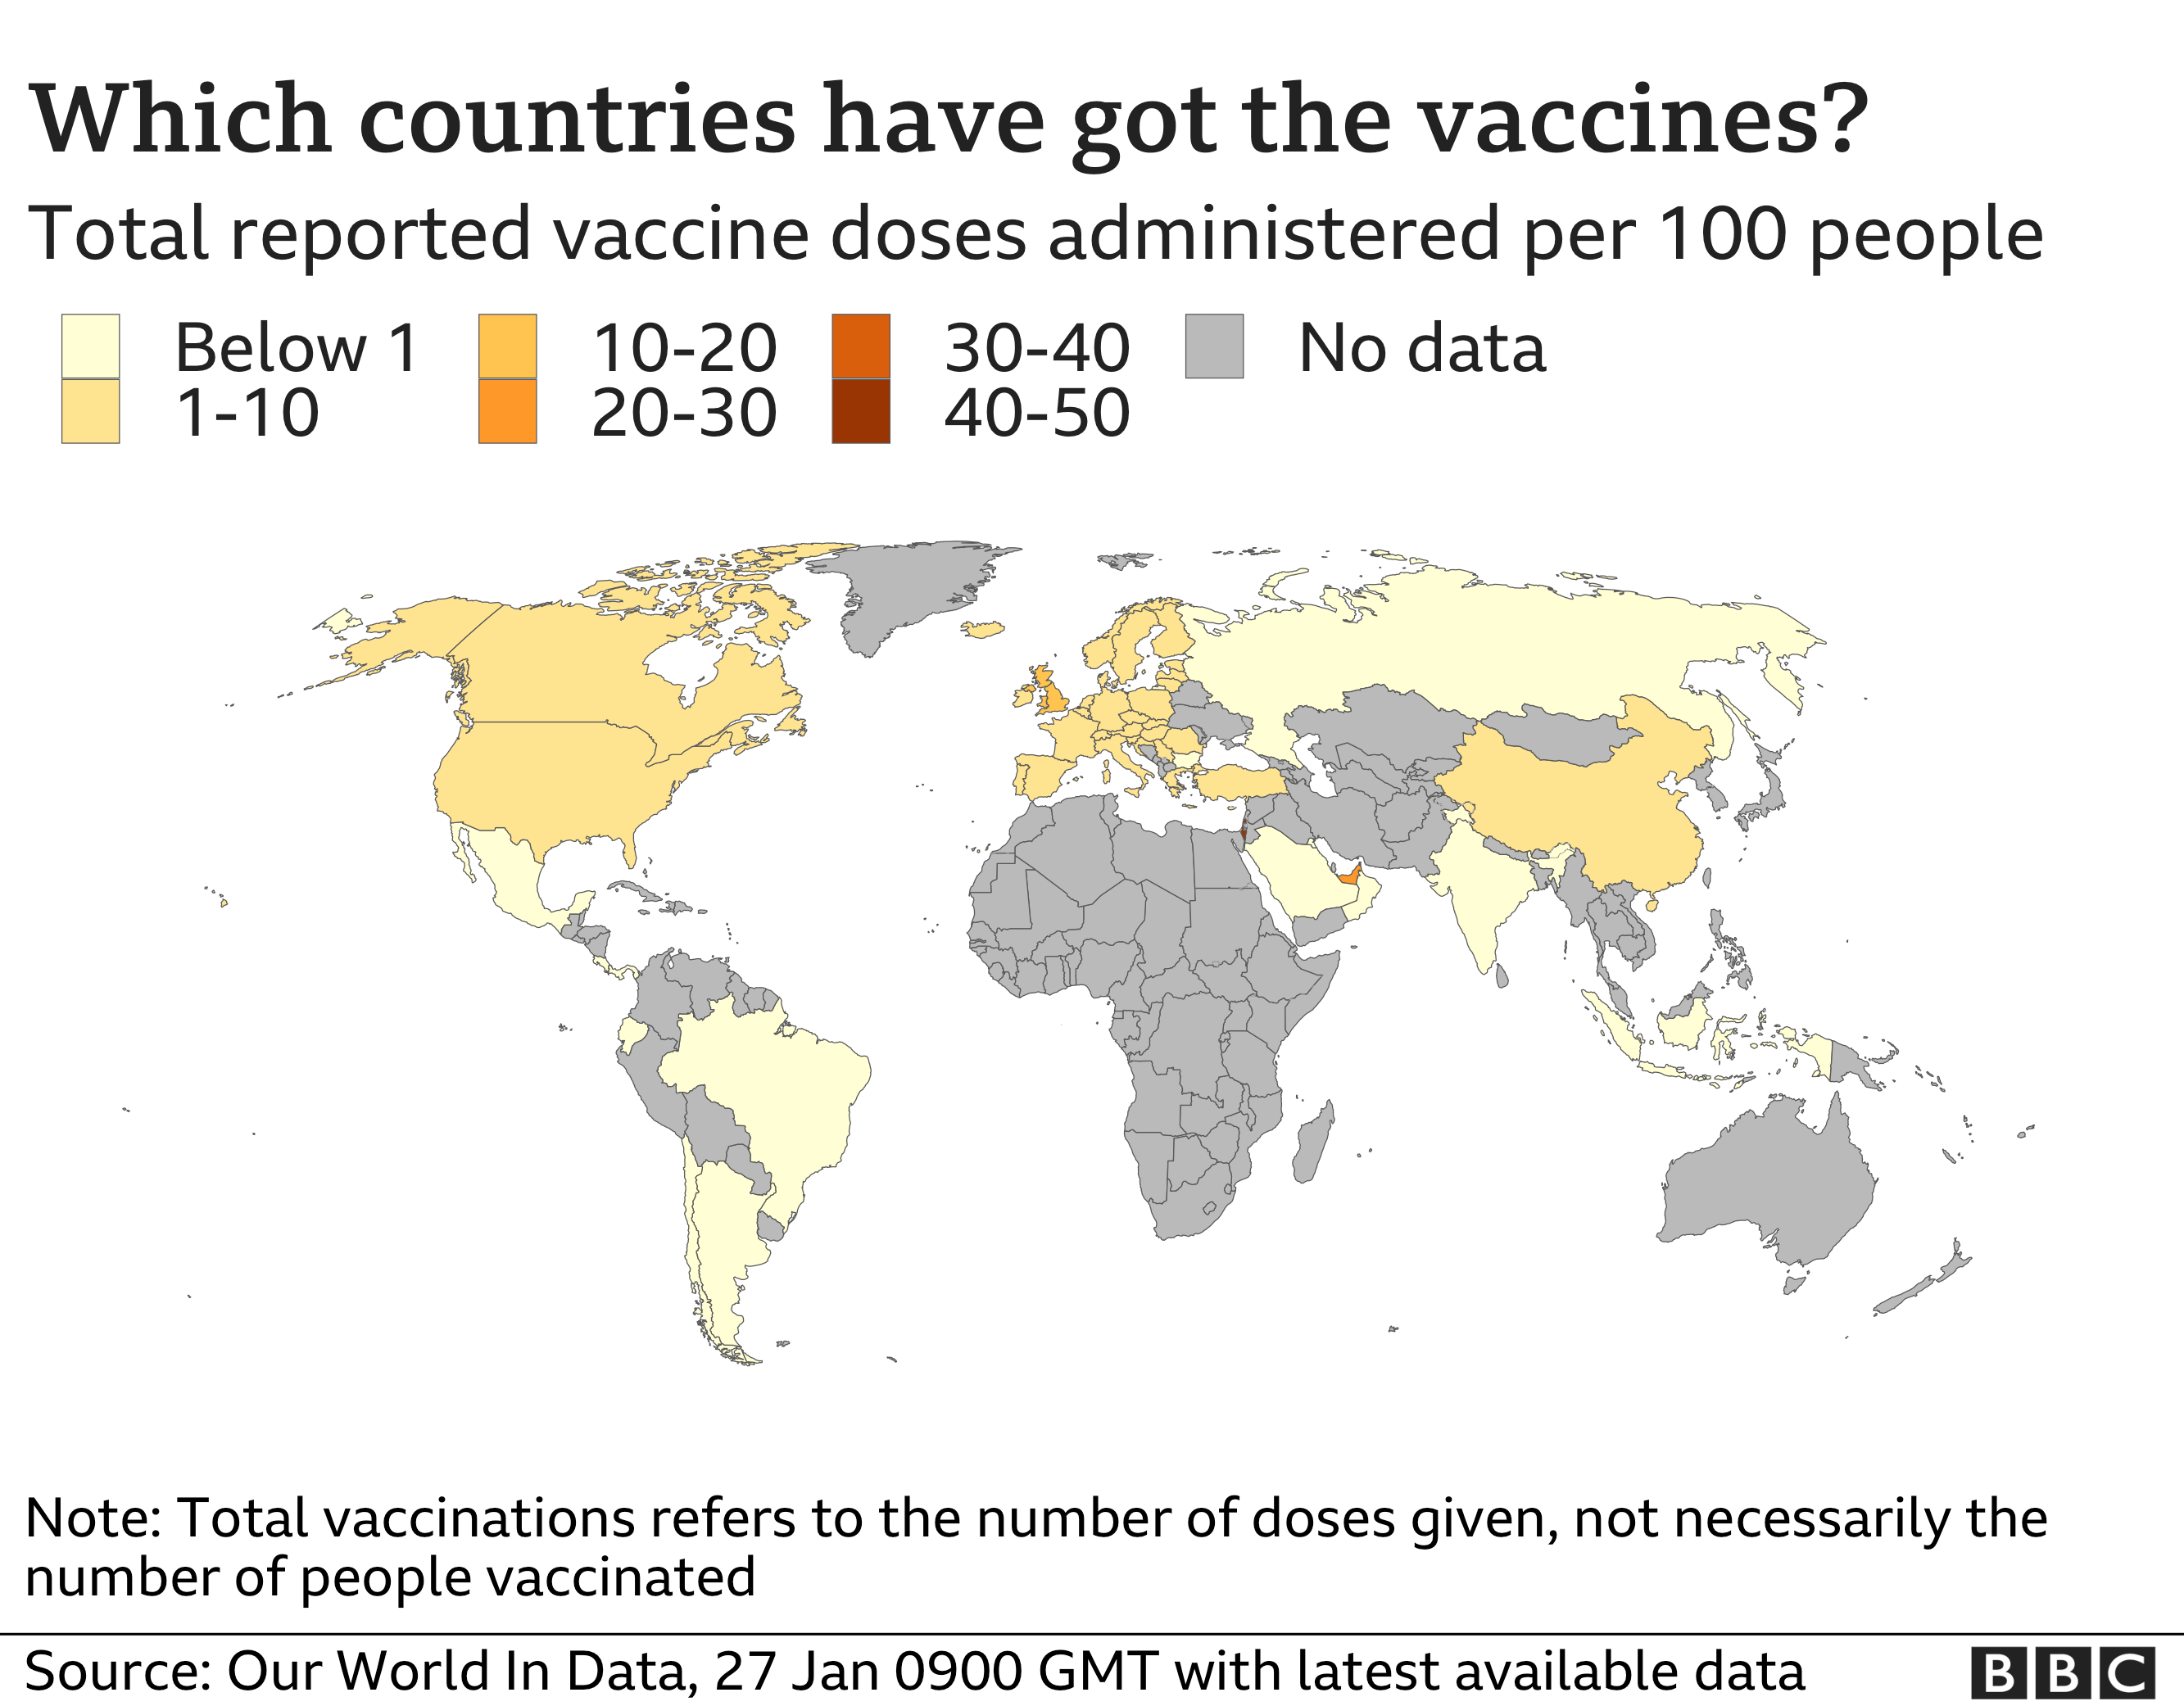 Map showing the number of vaccine doses administered per 100 people